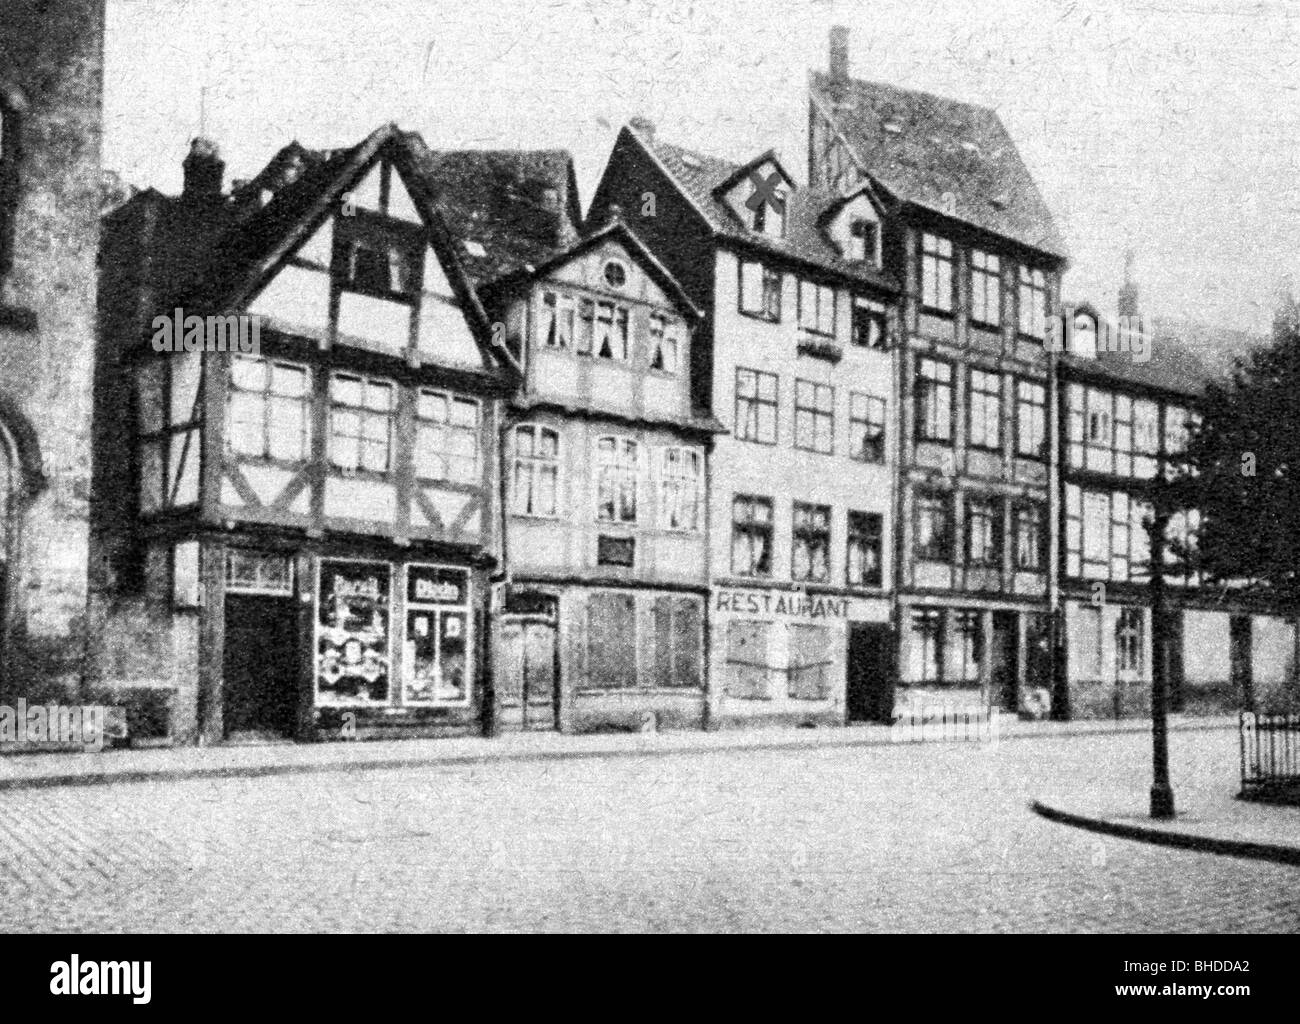 Haarmann, Friedrich 'Fritz', 25.10.1879 - 15.4.1925, German serial killer, house with his flat, Rote Reihe No. 4, Hanover, Stock Photo